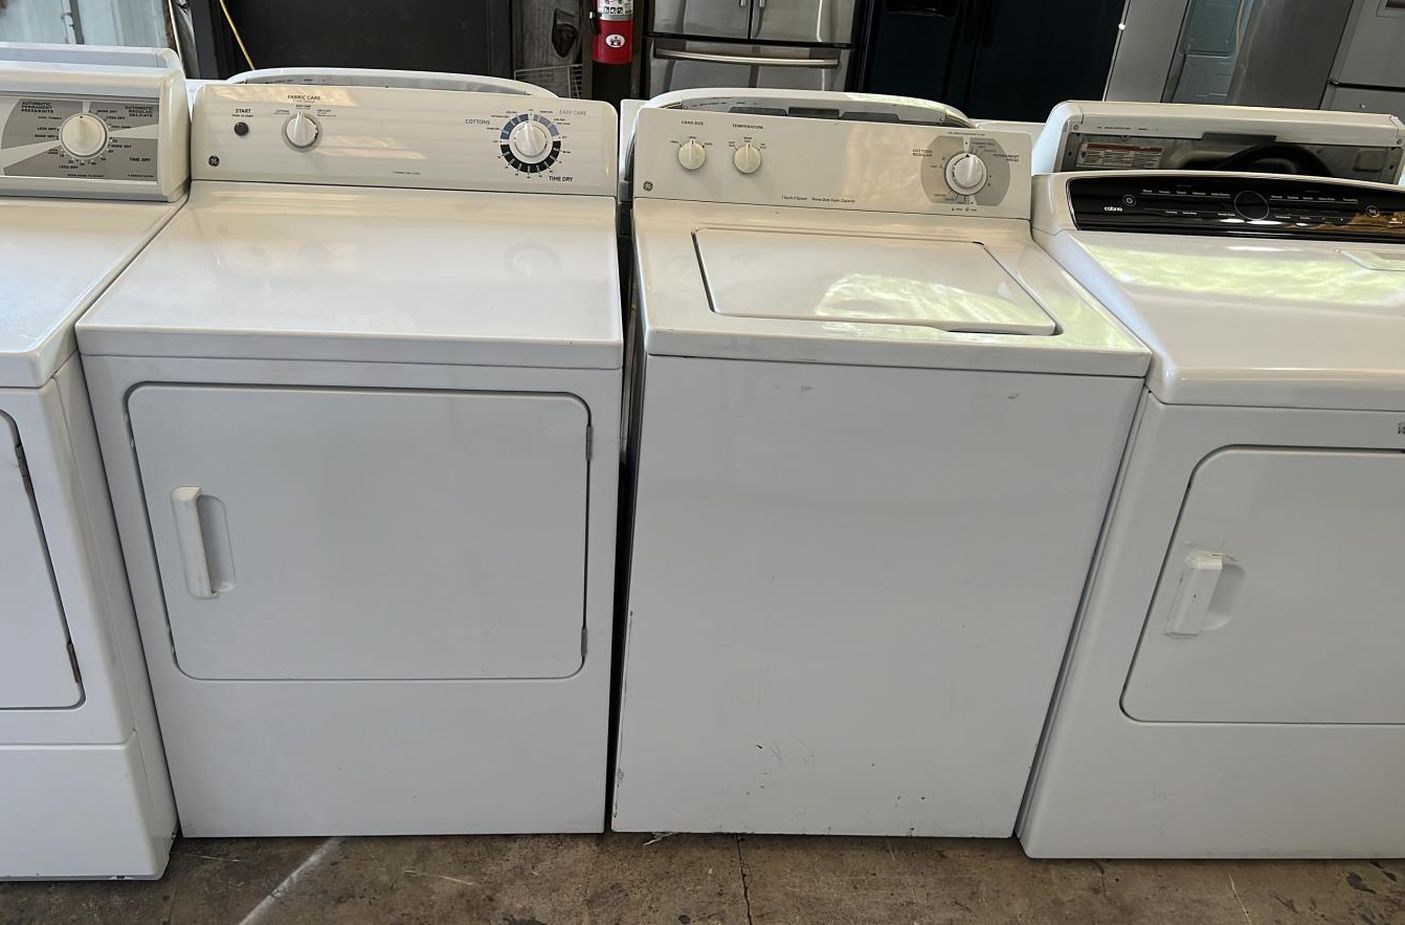 GE Washer & Dryer Electric White Heavy Duty
